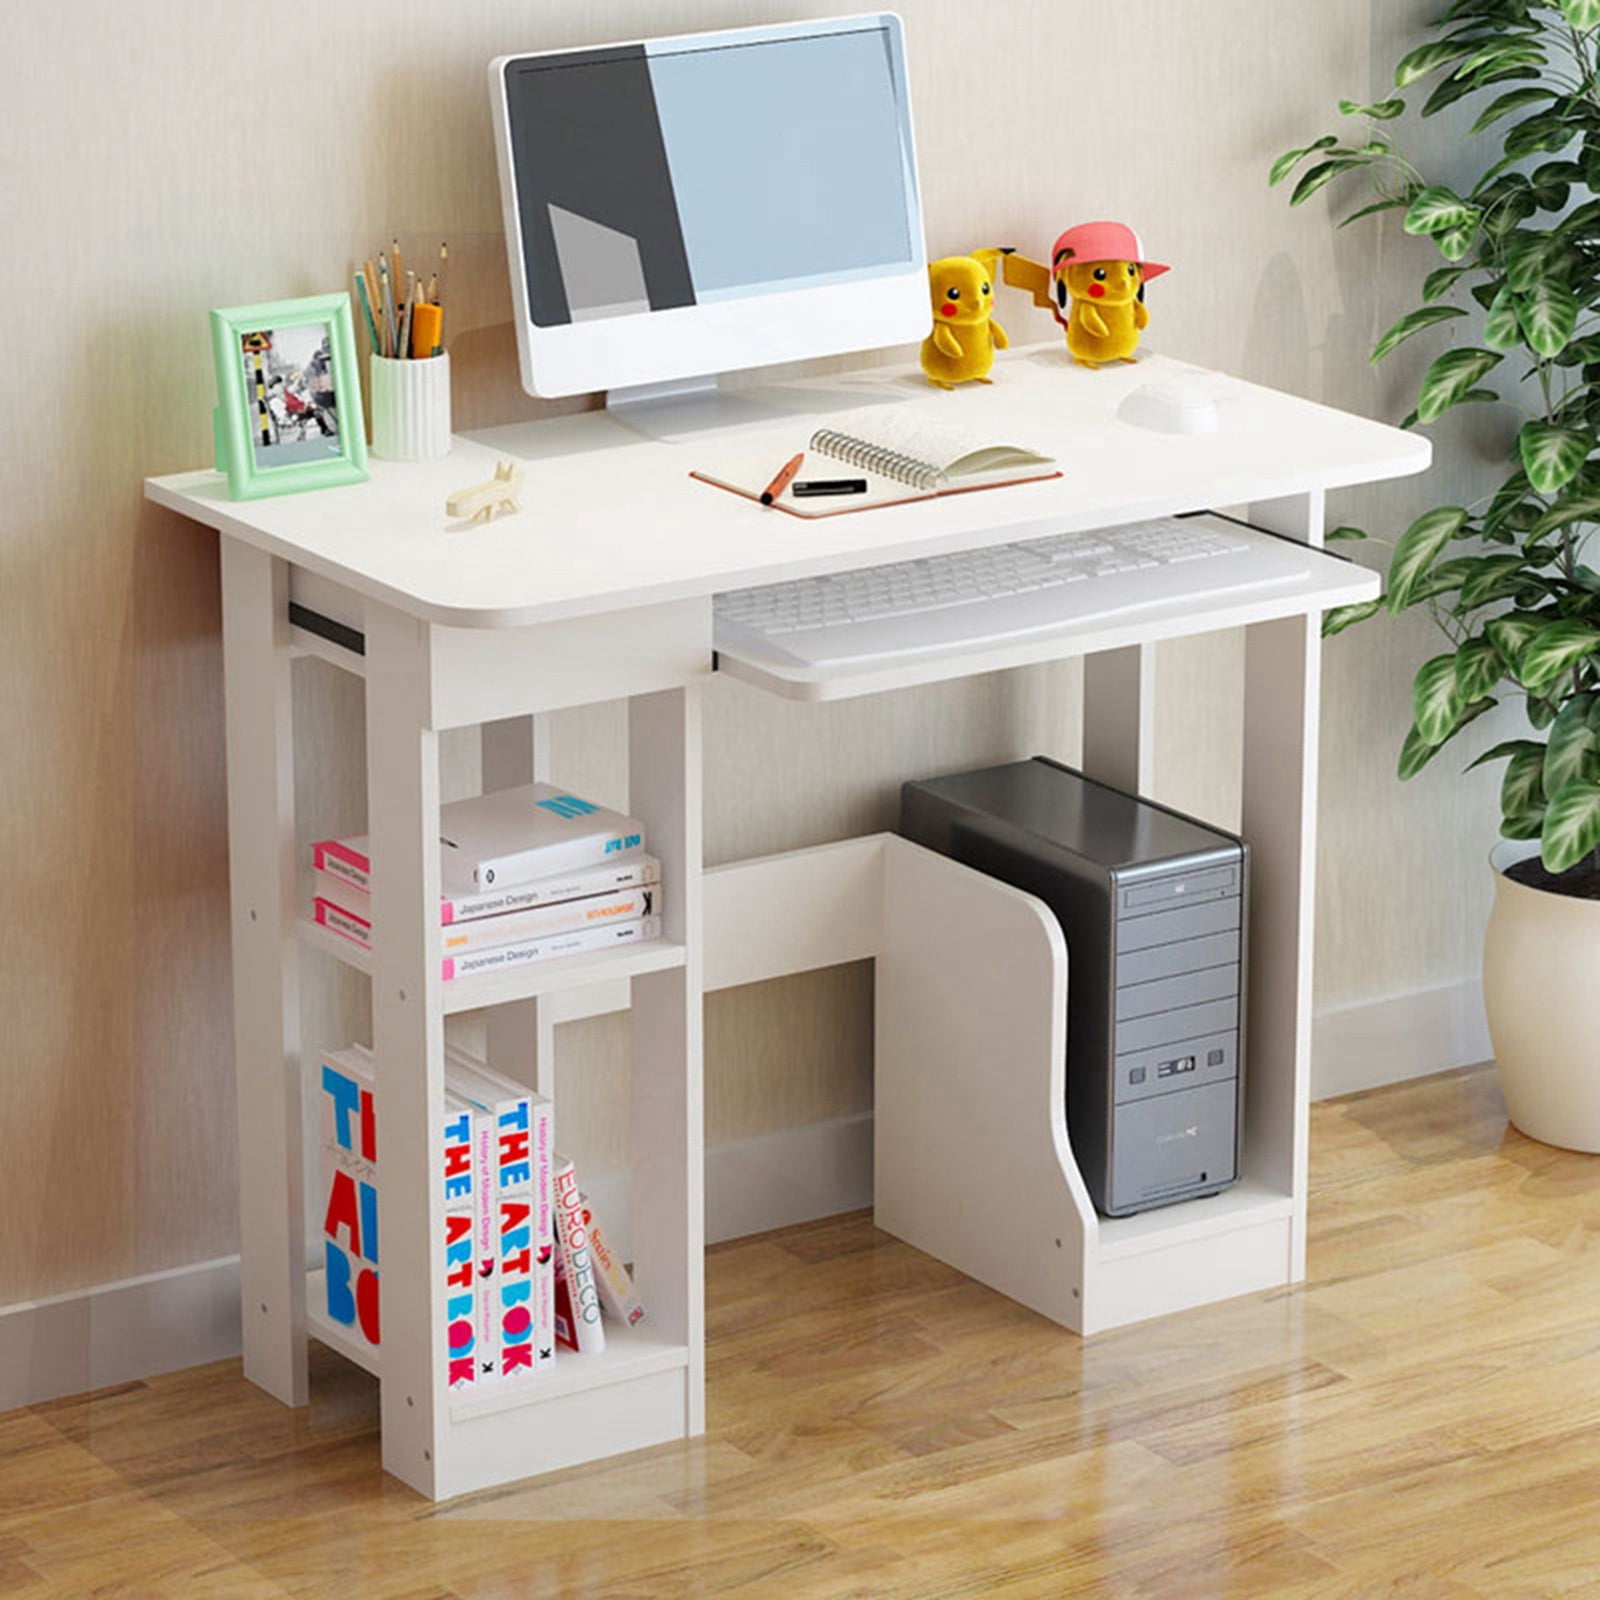 Details about   Computer Desk Laptop Table with Drawers Home Office Study Student Furniture Whit 